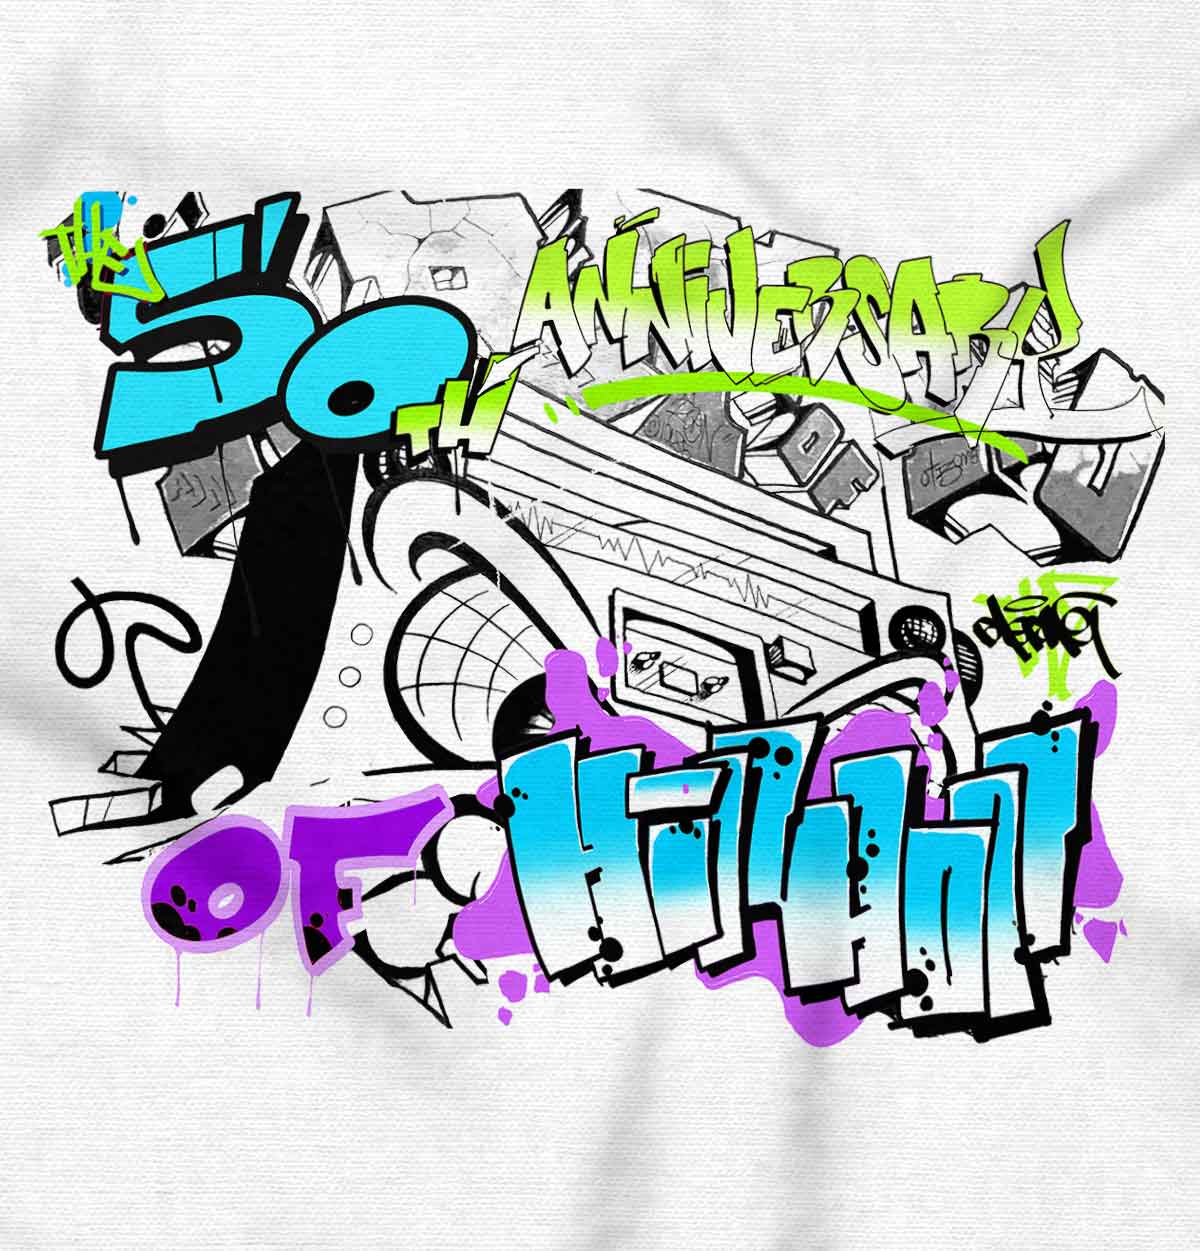 This design honors the incredible journey of Hip Hop culture with a visually captivating graffiti art.